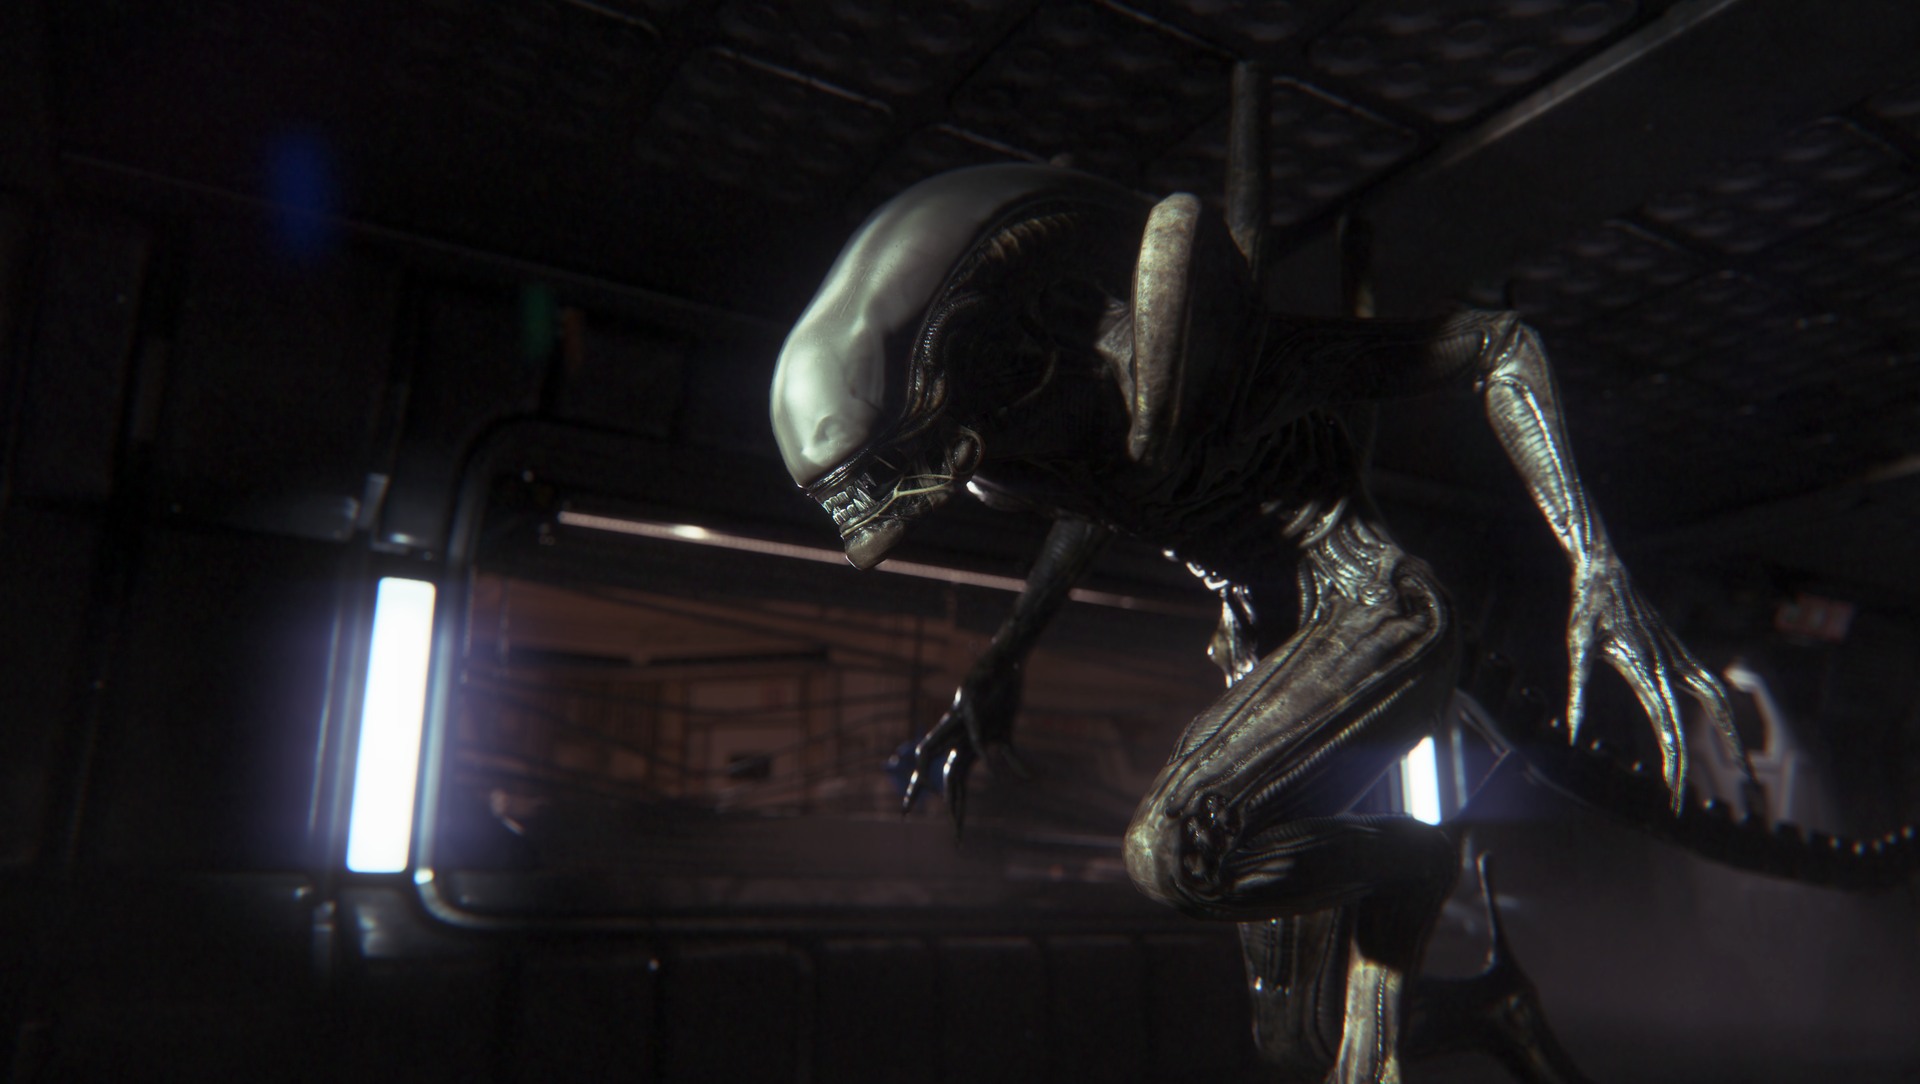 “Alien Isolation” Mod Removes Alien - Now You See Him... Now You Don't